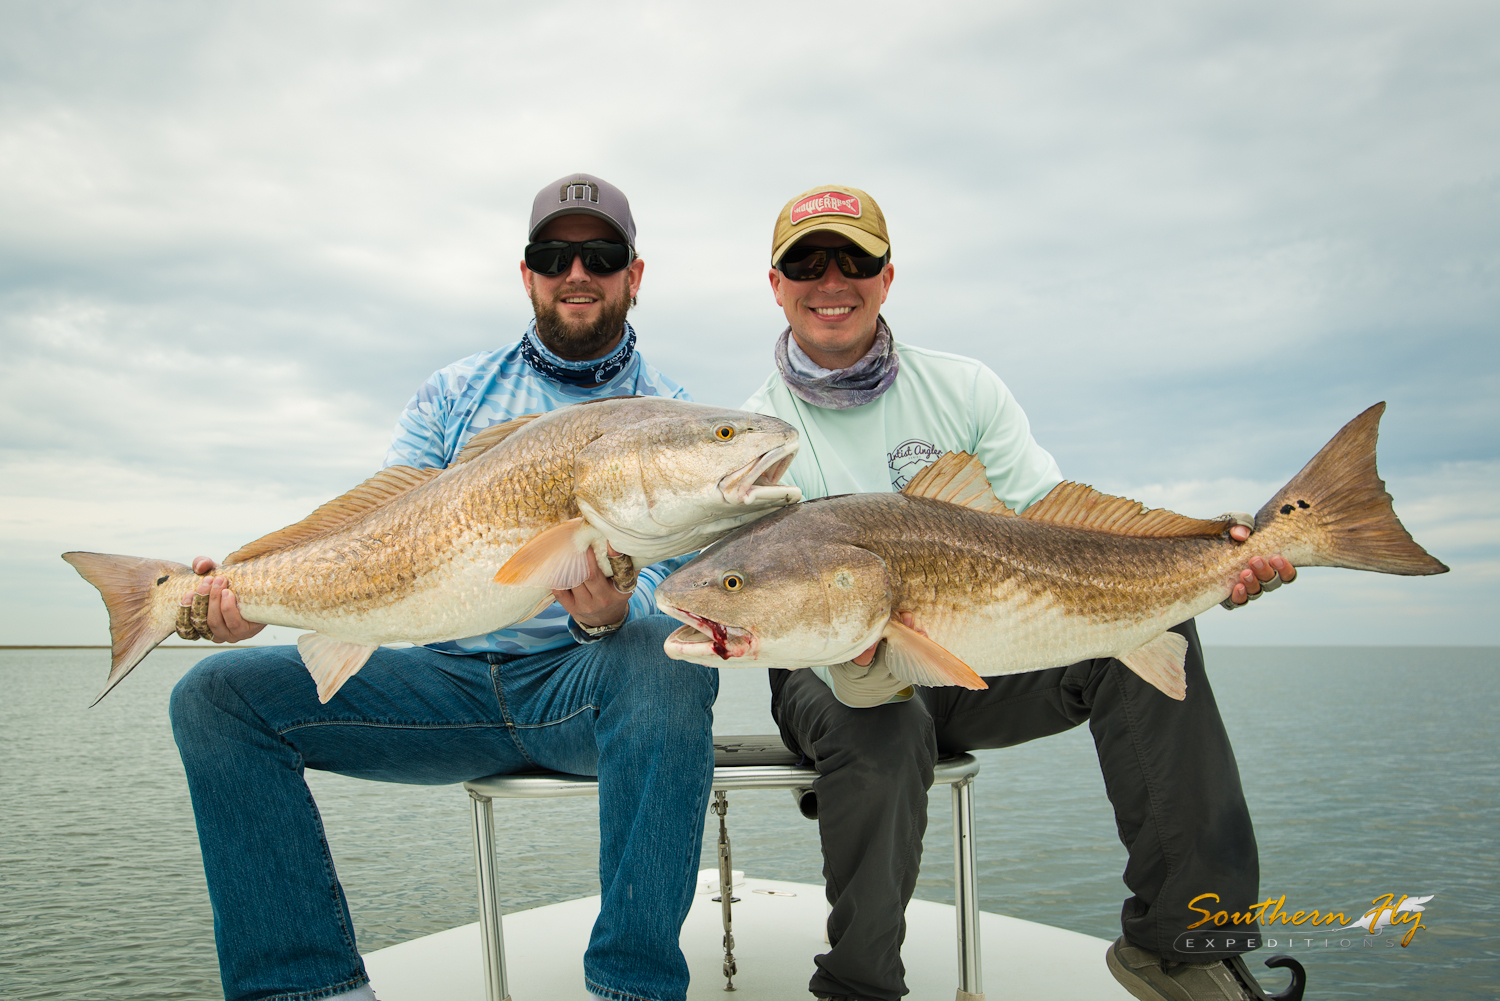 fly fishing vacation new orleans louisiana southern fly expeditions 